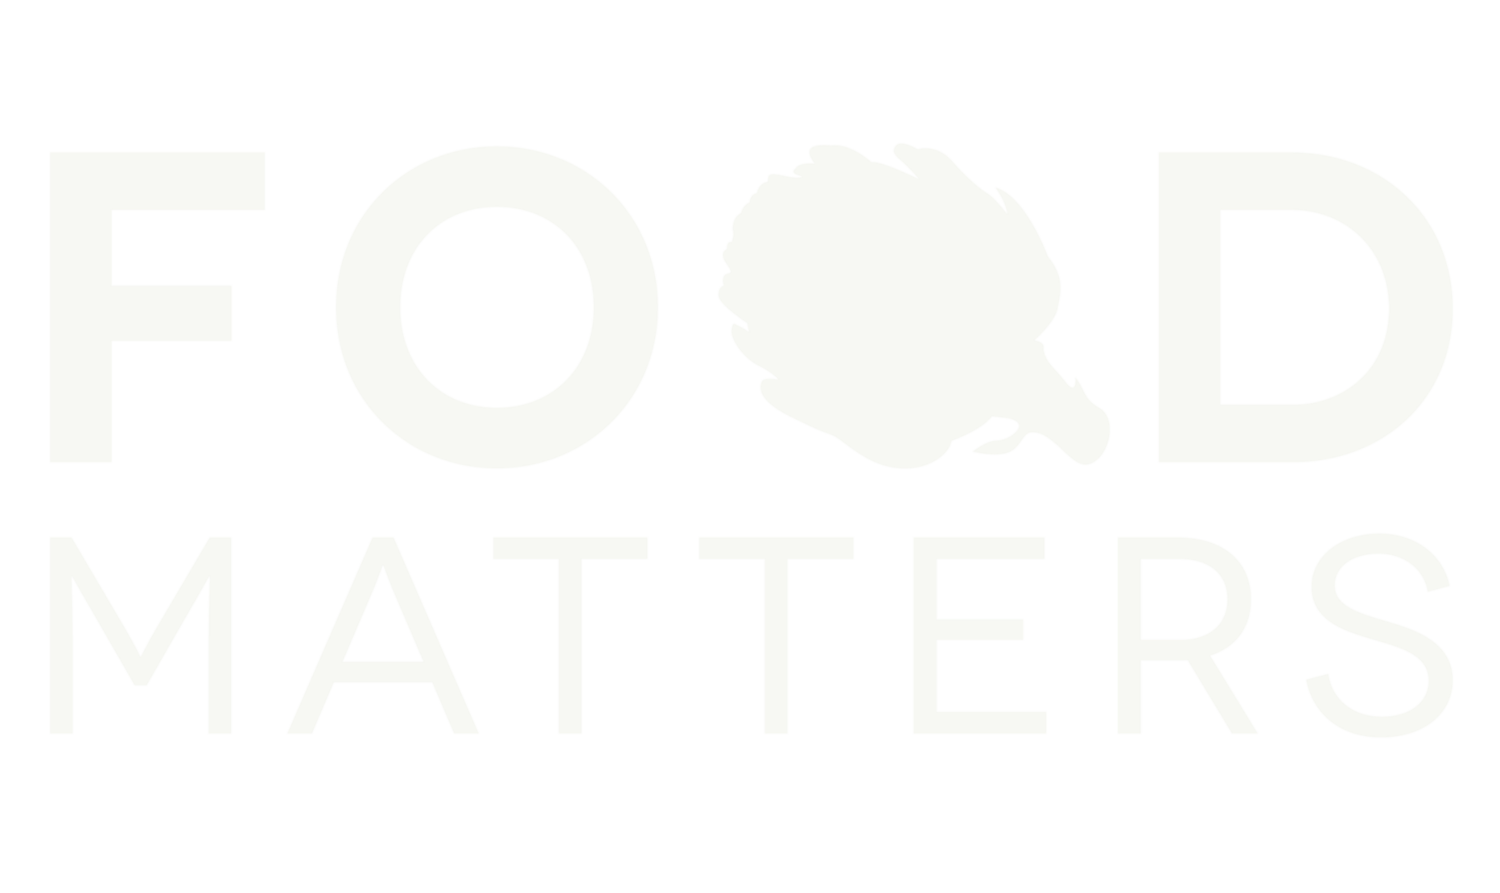 Food Matters Catering Co